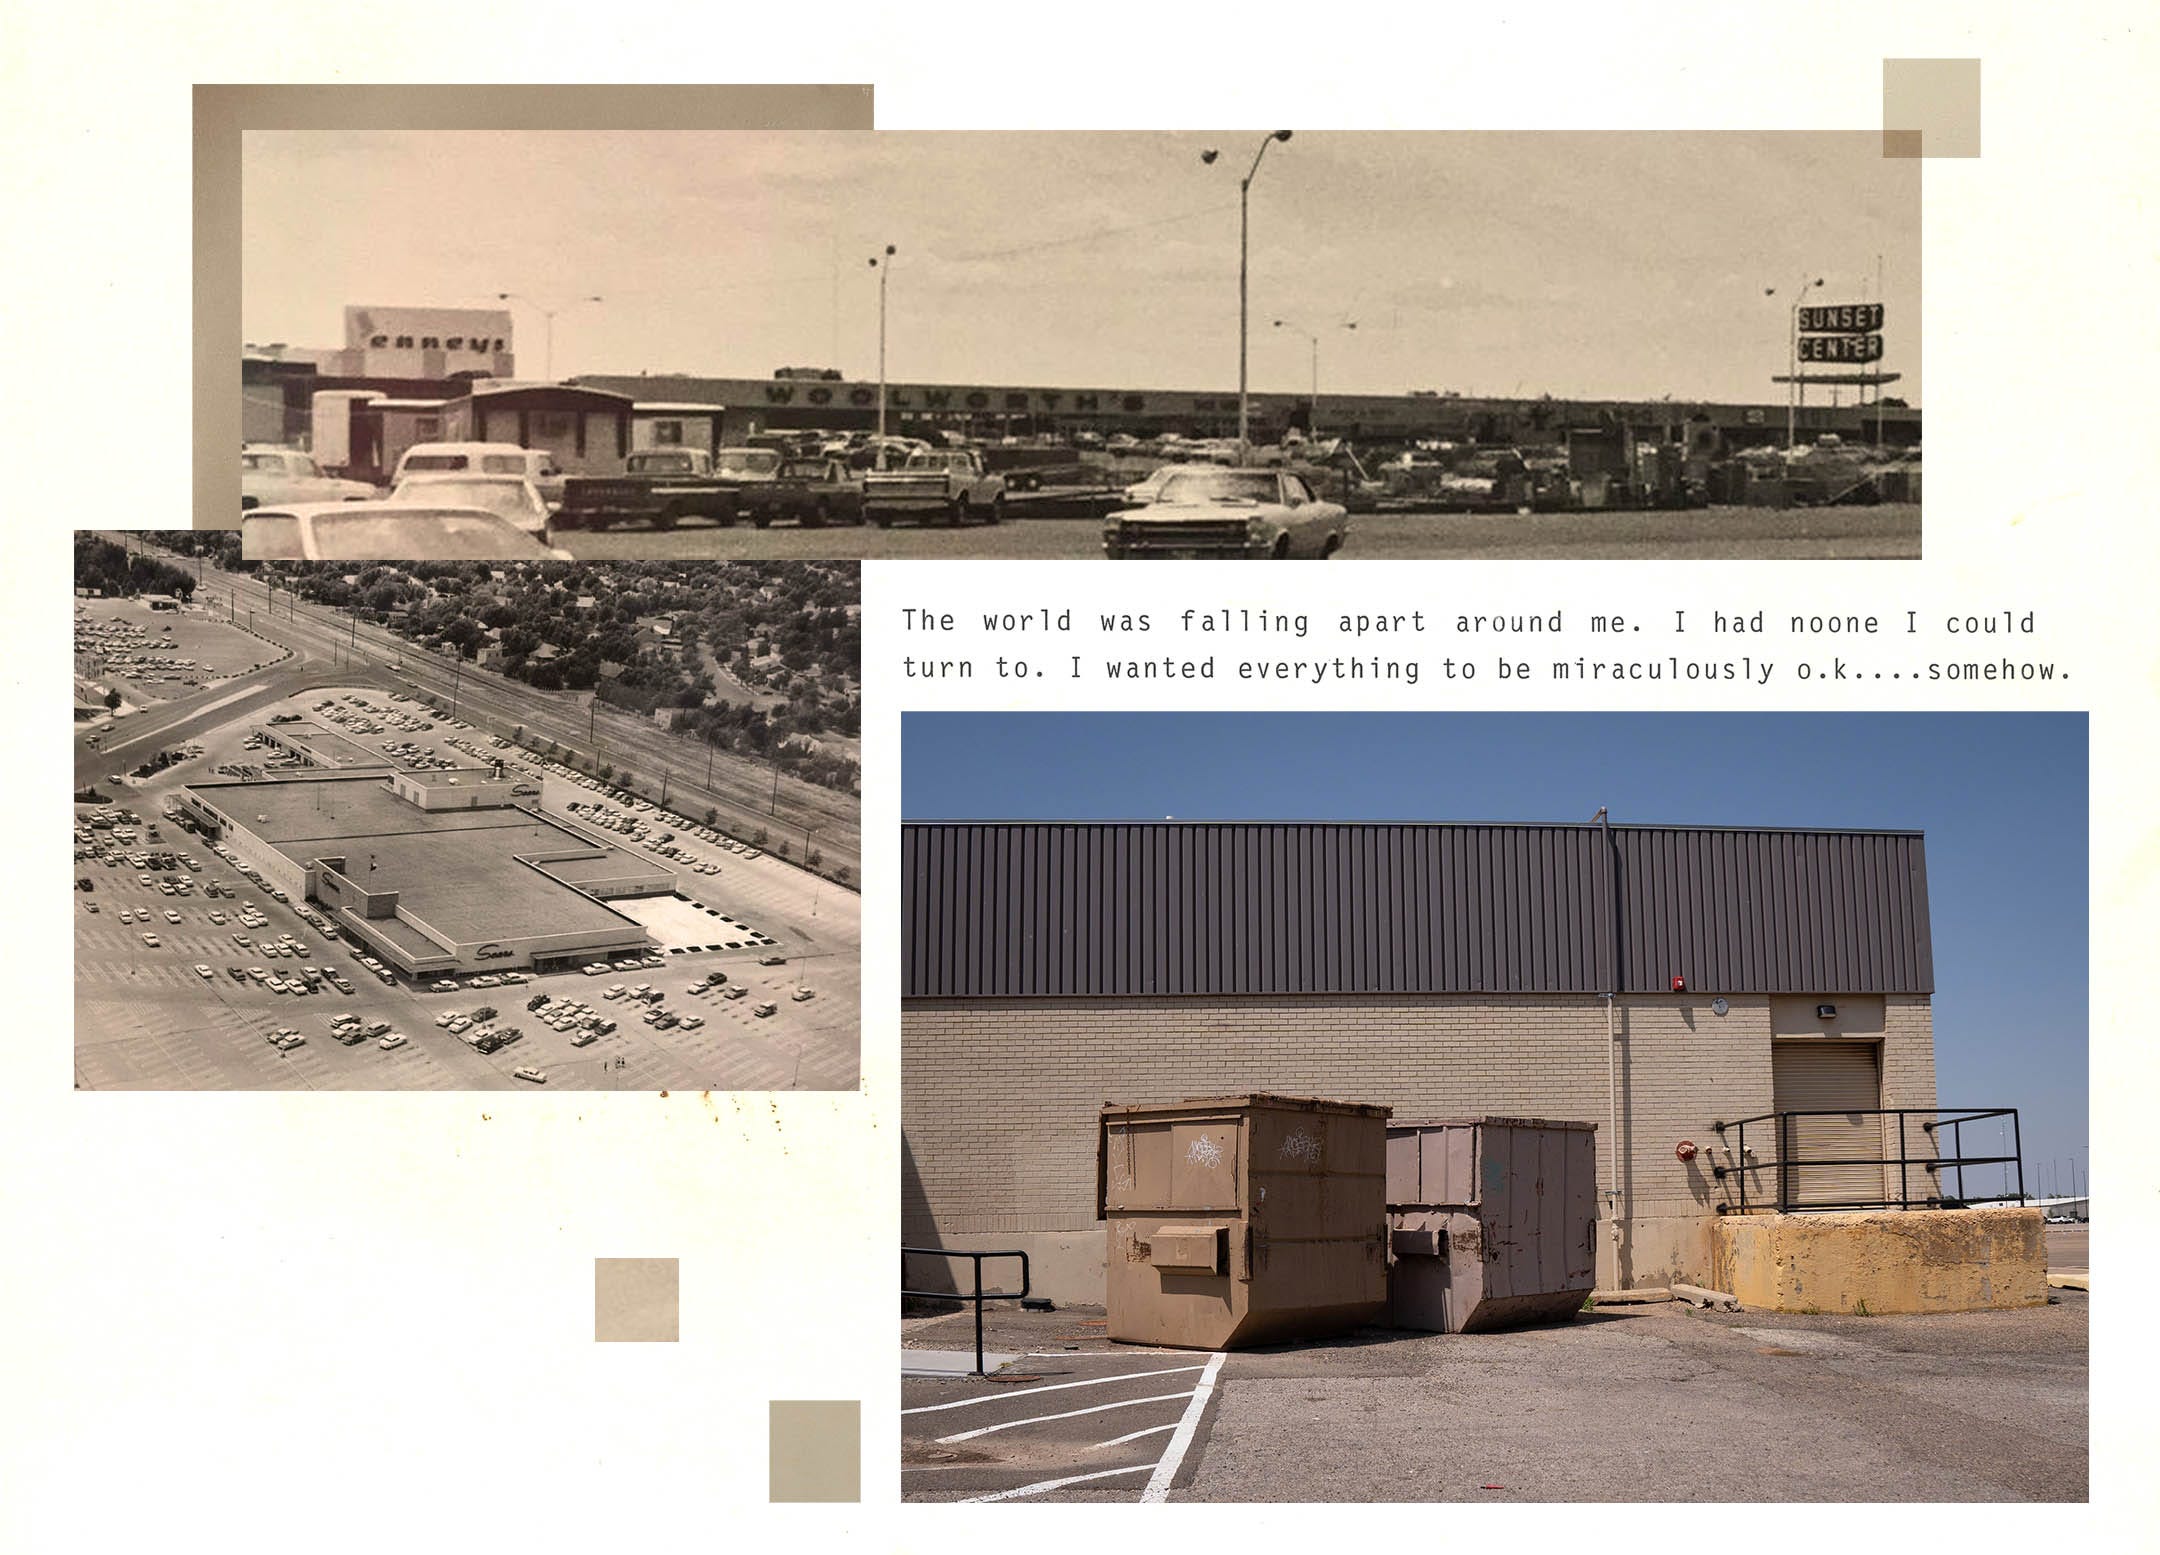 Dumpsters outside the Sunset Center (pictured at left in the 1960s) where a Safeway was located in 1975. The center was a few blocks from the apartments where Nicole Carroll lived as a child. It was there where she and her sister found a black trash bag that held puppies.